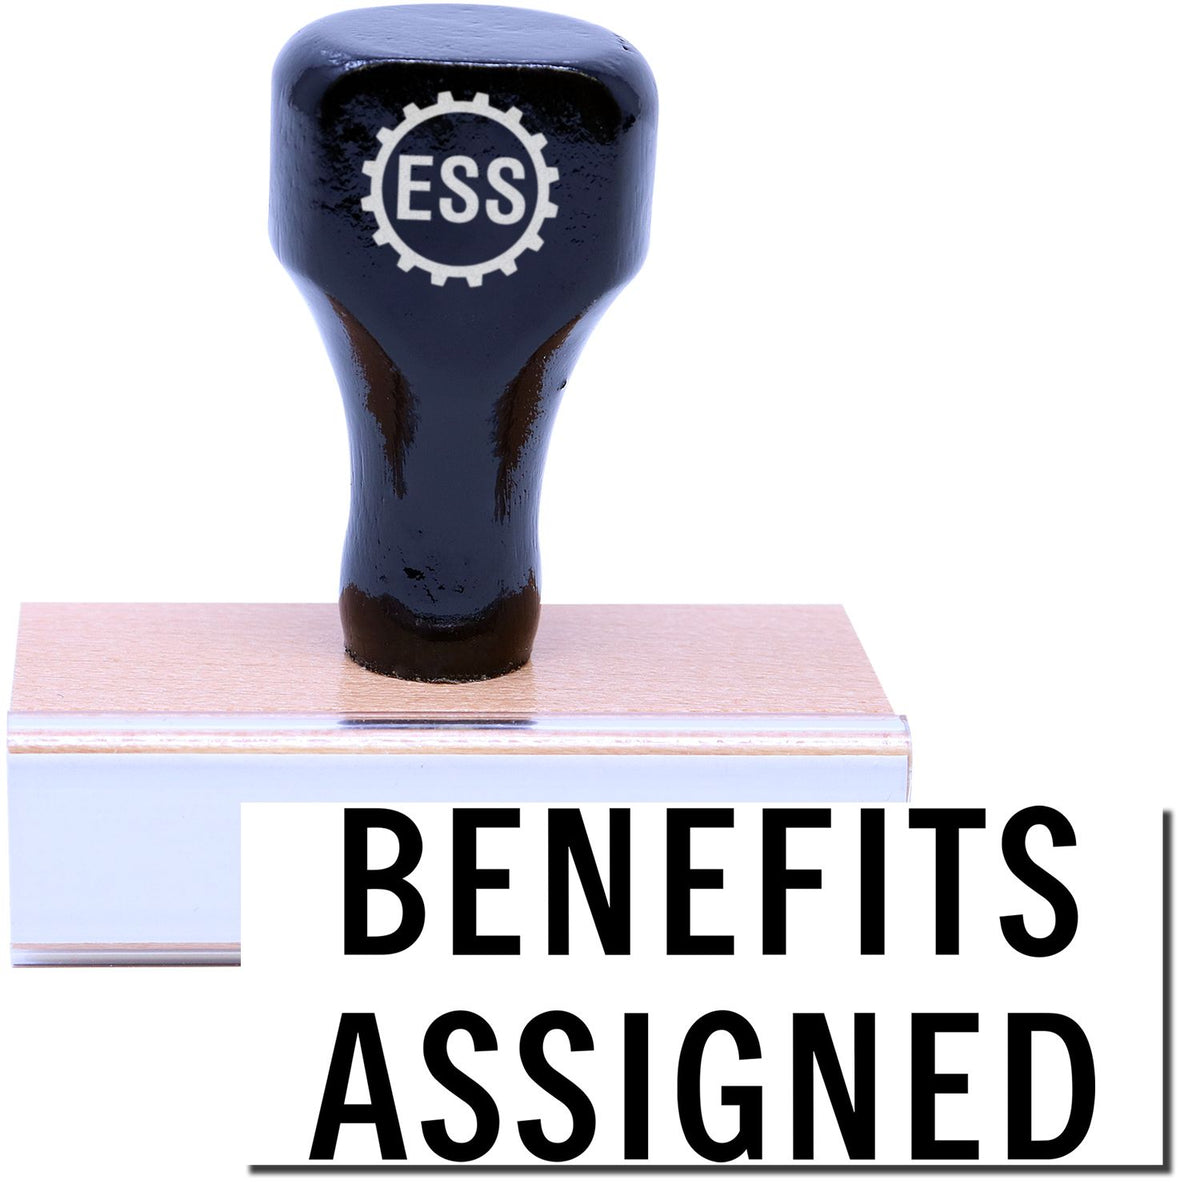 Benefits Assigned Rubber Stamp